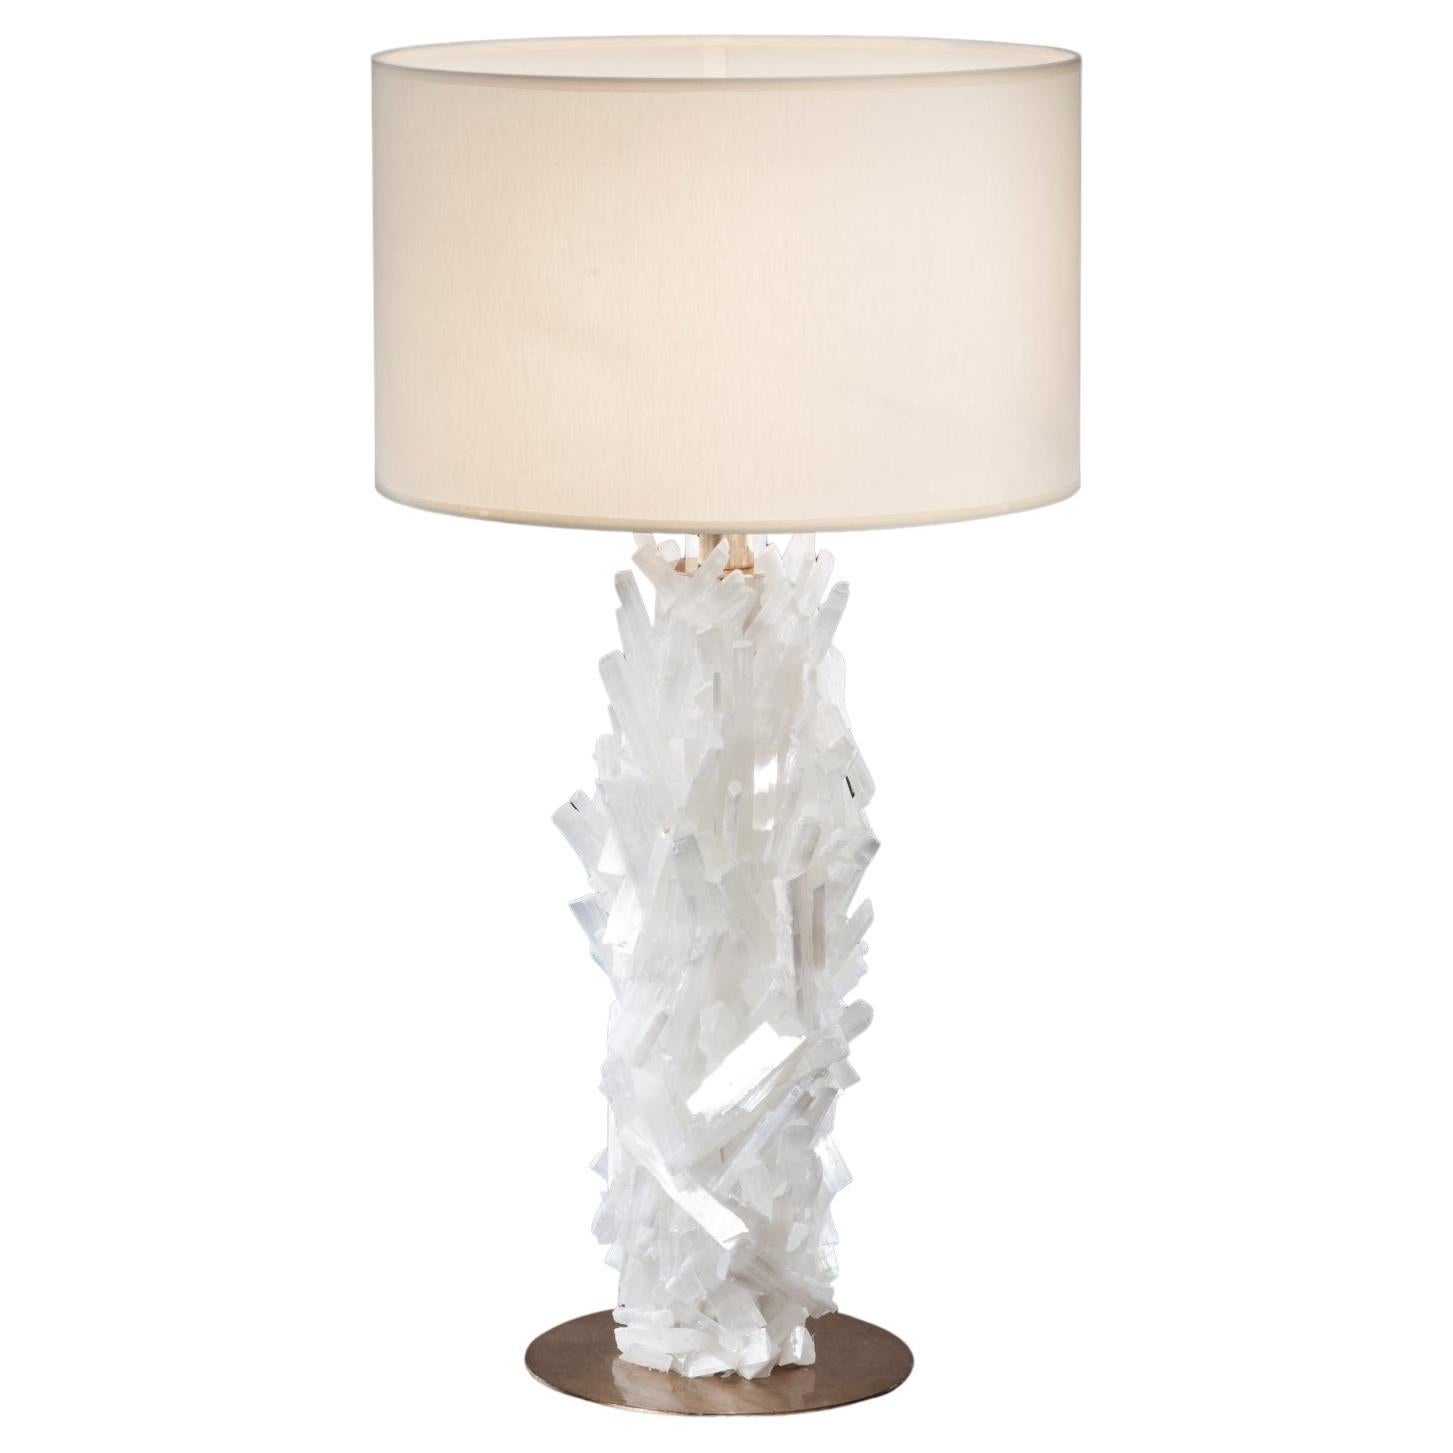 Natural Stone Table Lamp by Aver